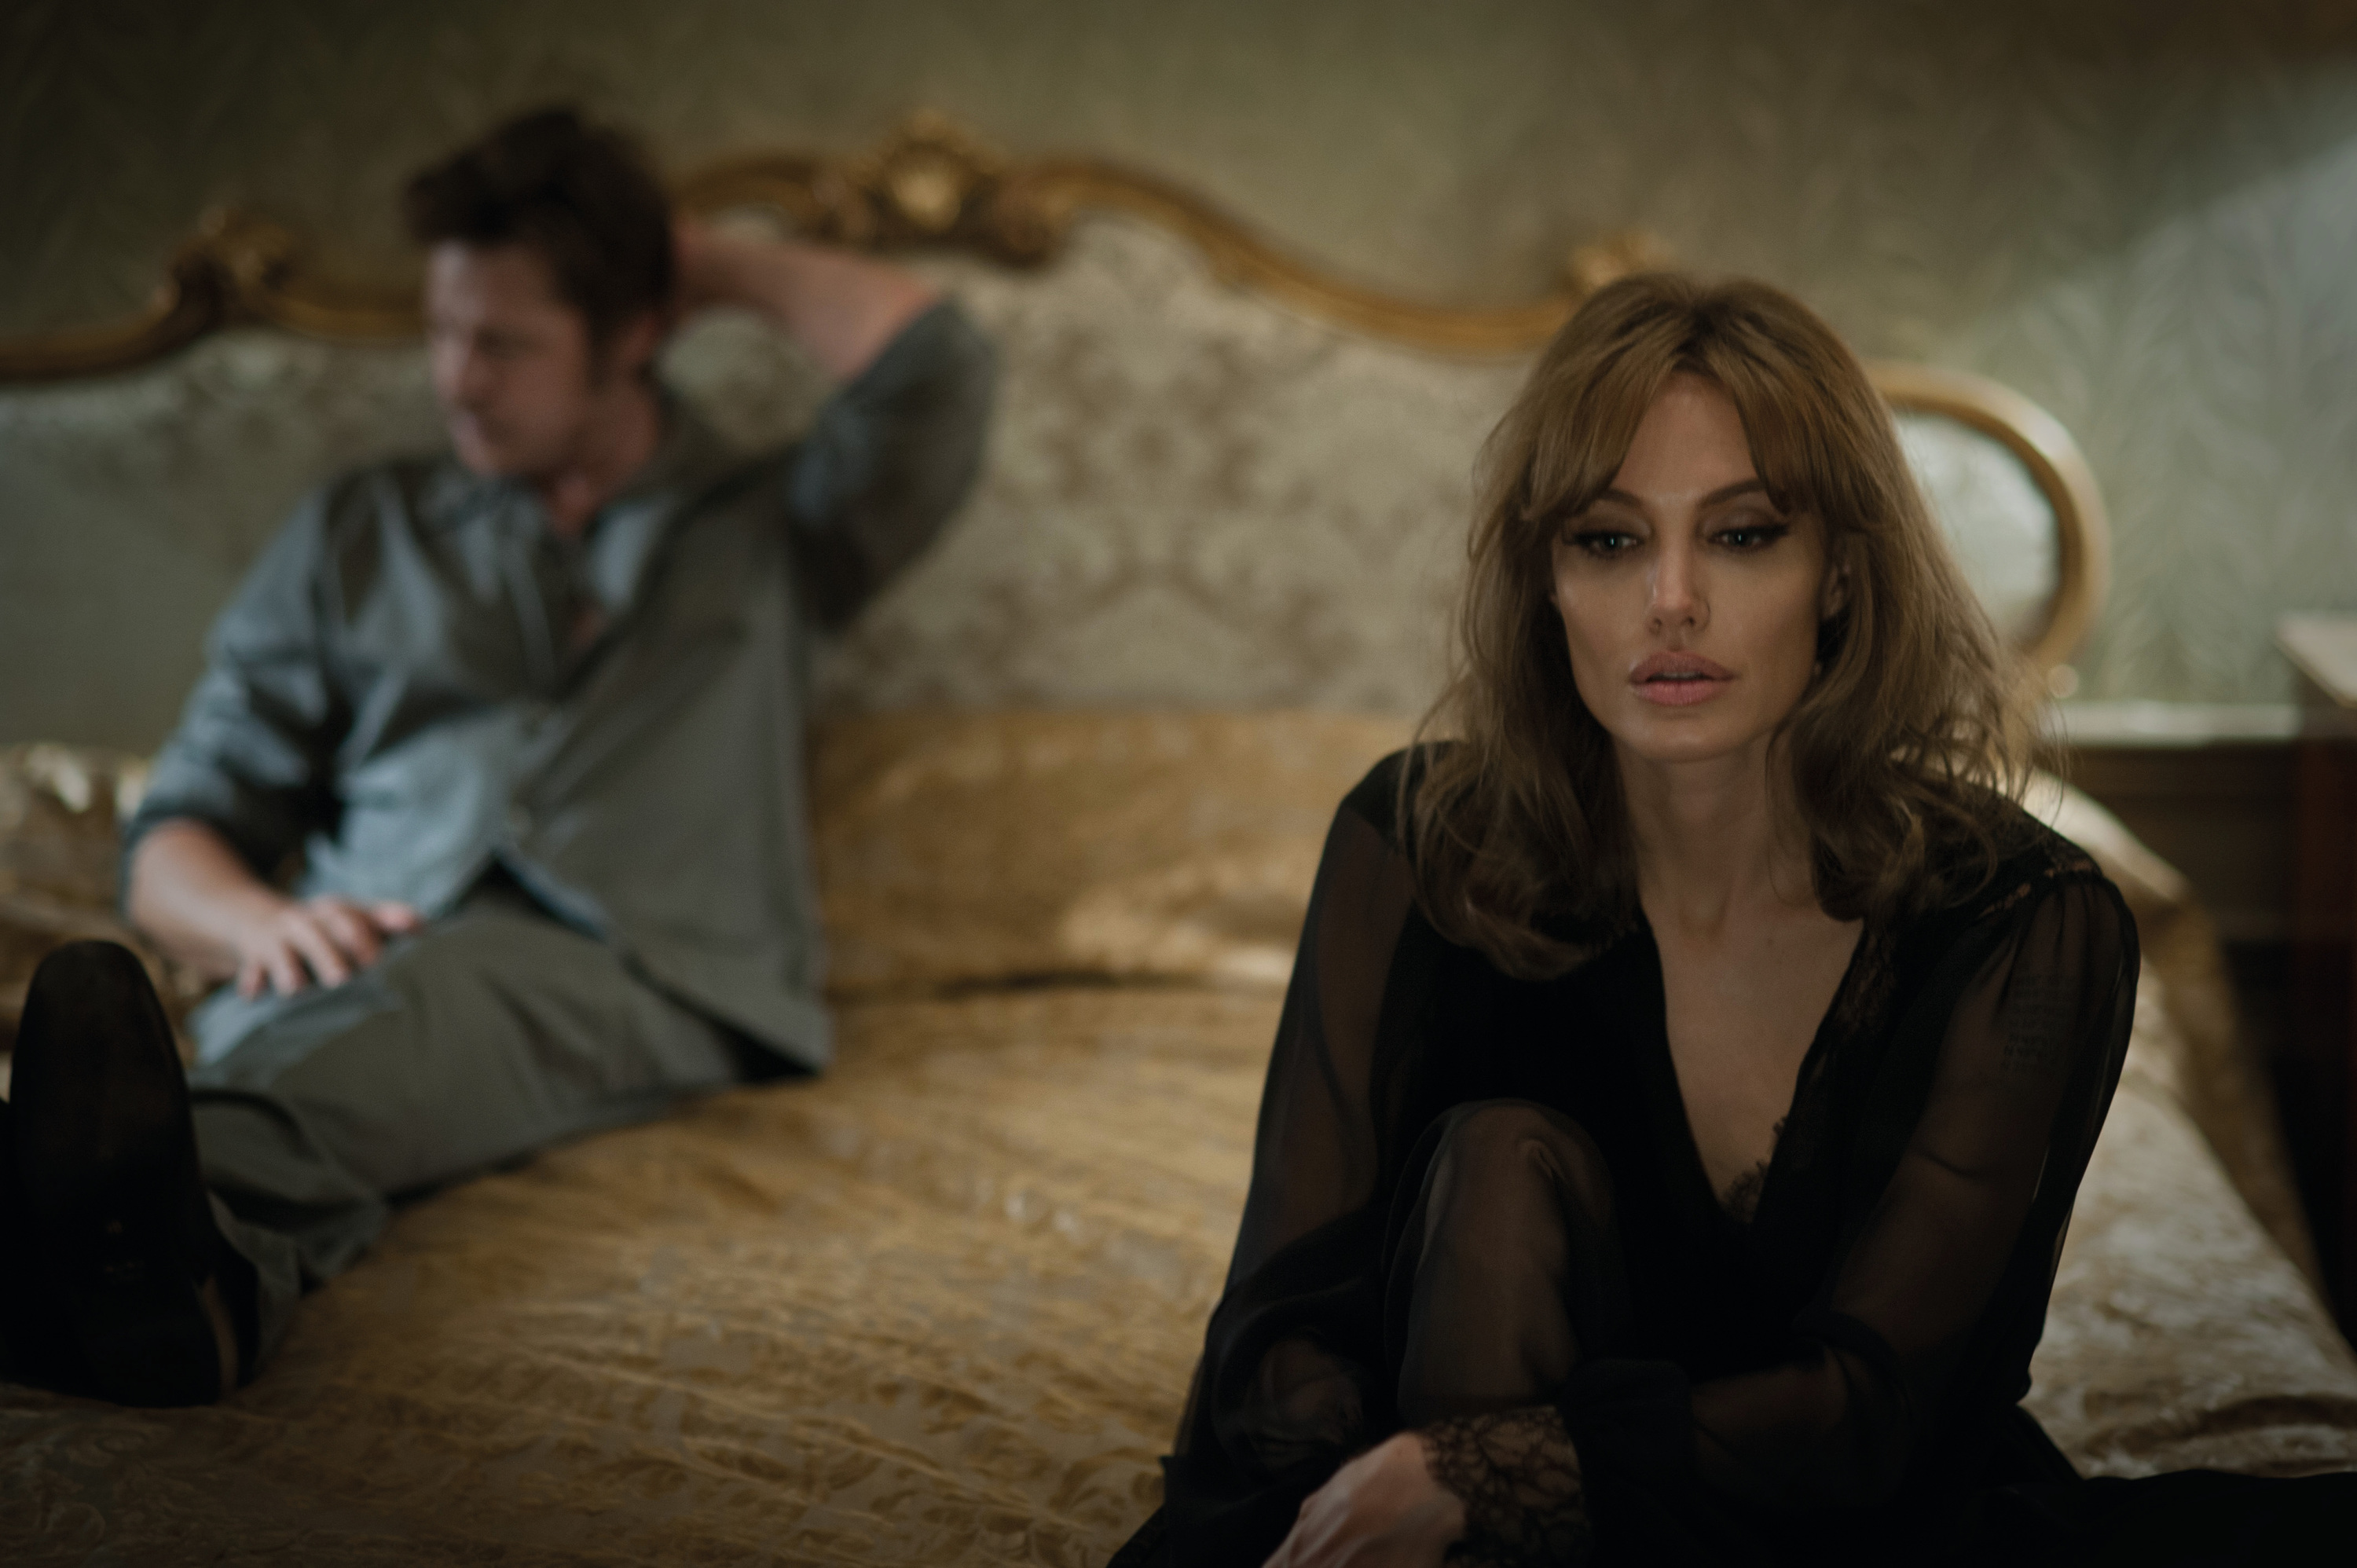 Angelina Jolie Porn Film - By the Sea 2015, directed by Angelina Jolie | Film review